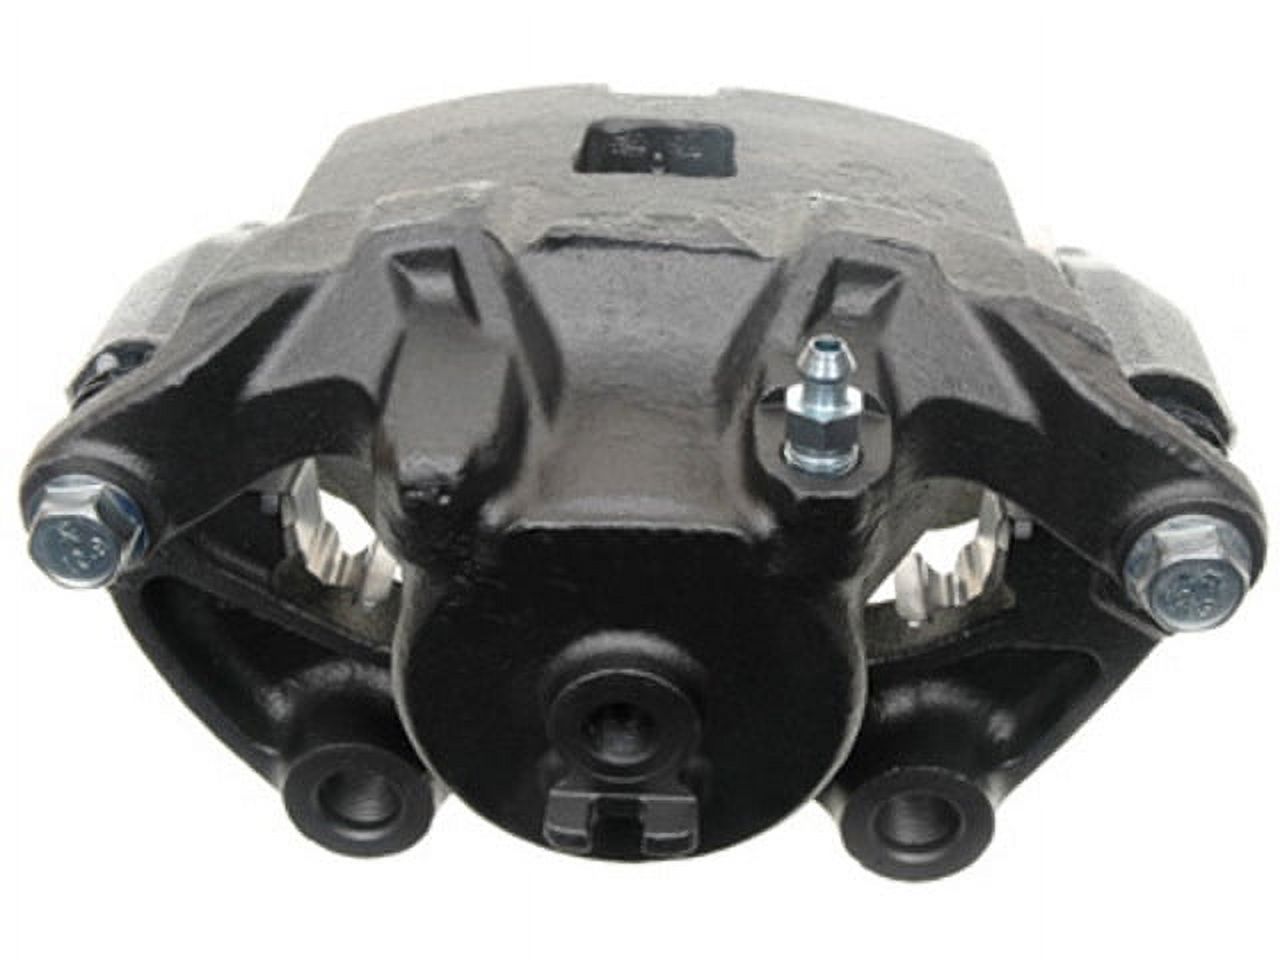 Raybestos Brakes Disc Brake Caliper P/N:Frc11372 Fits select: 2005-2006 NISSAN ALTIMA S/SL, 2002-2004 NISSAN ALTIMA - image 2 of 3